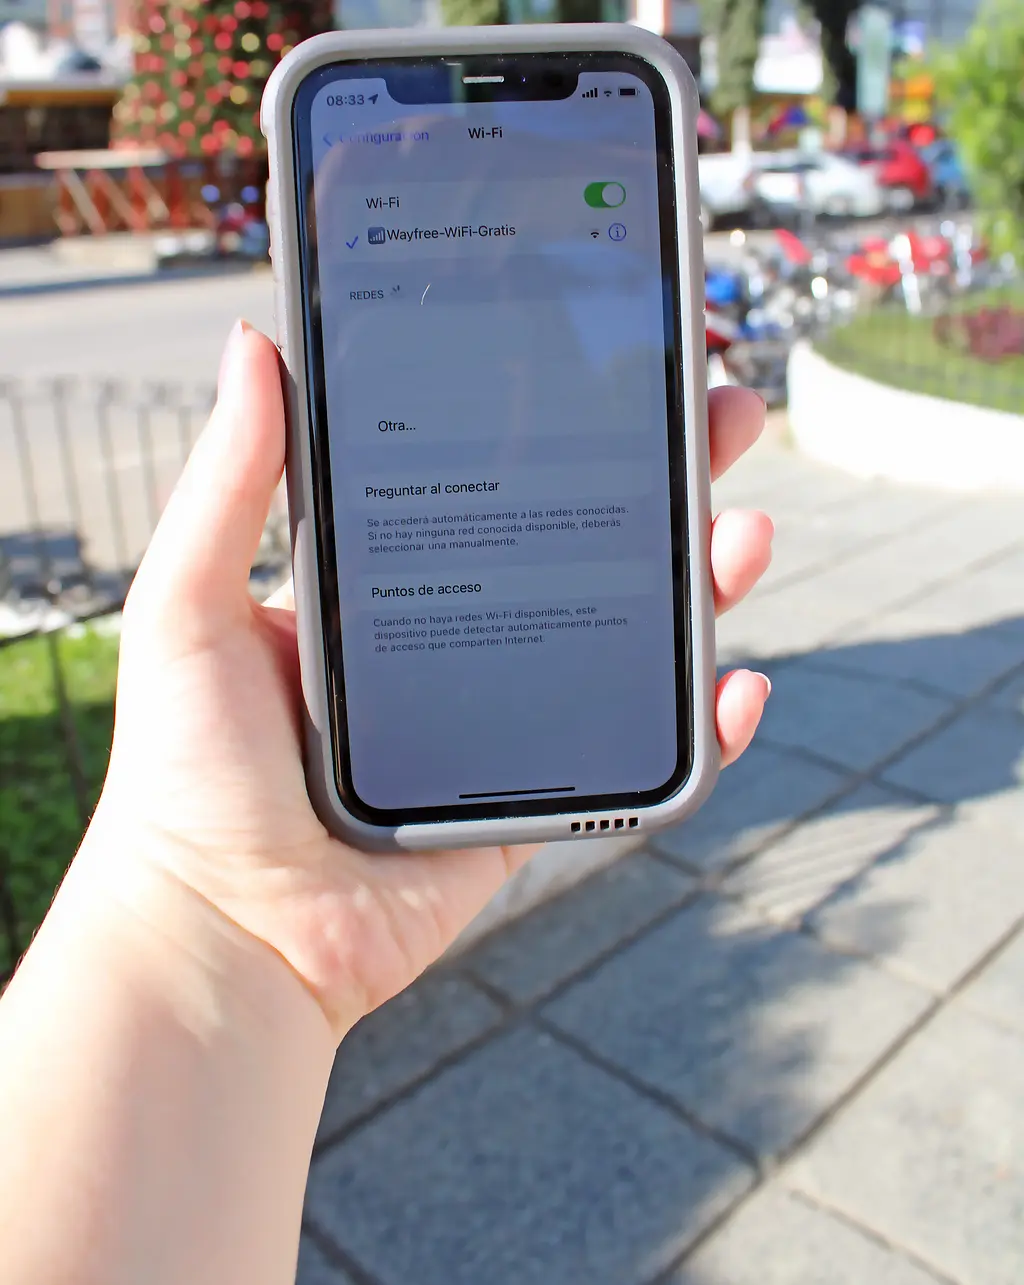 Close up photo of an iPhone screen, showing that it is connected to WiFi while in a park